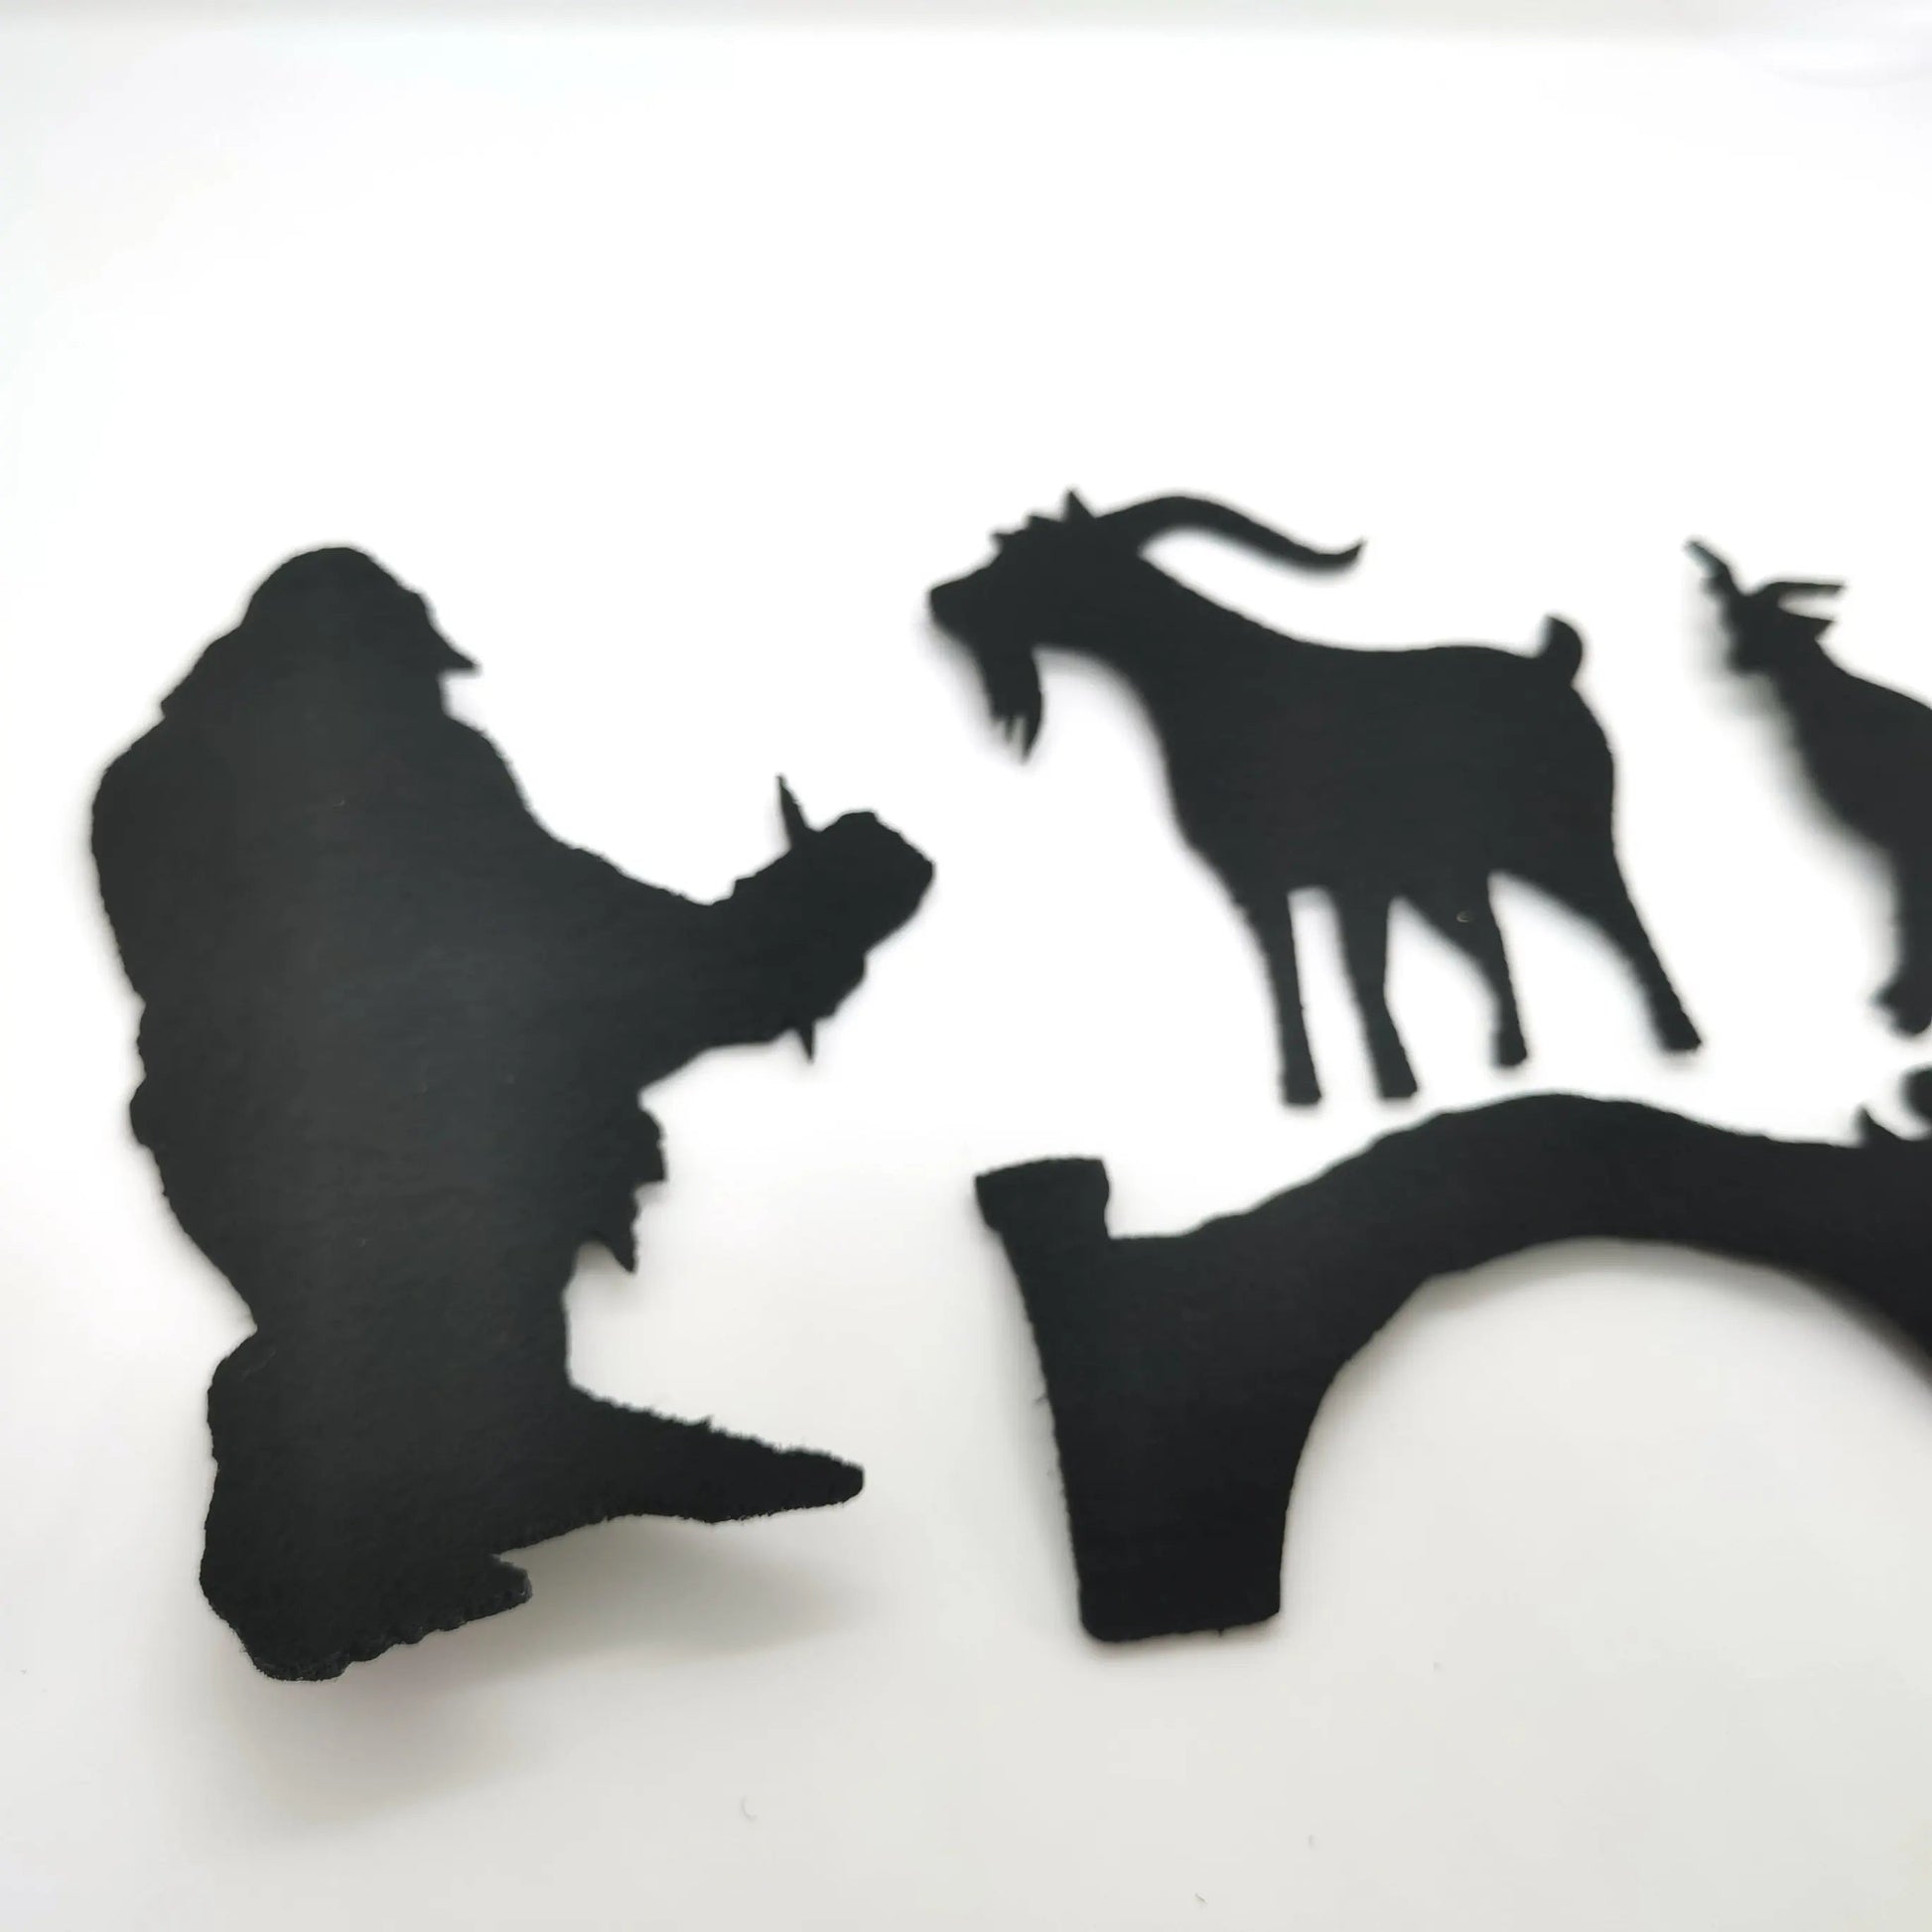 Interactive Three Billy Goats Gruff Shadow Puppet Game with Bamboo Stick for Children - ToylandEU